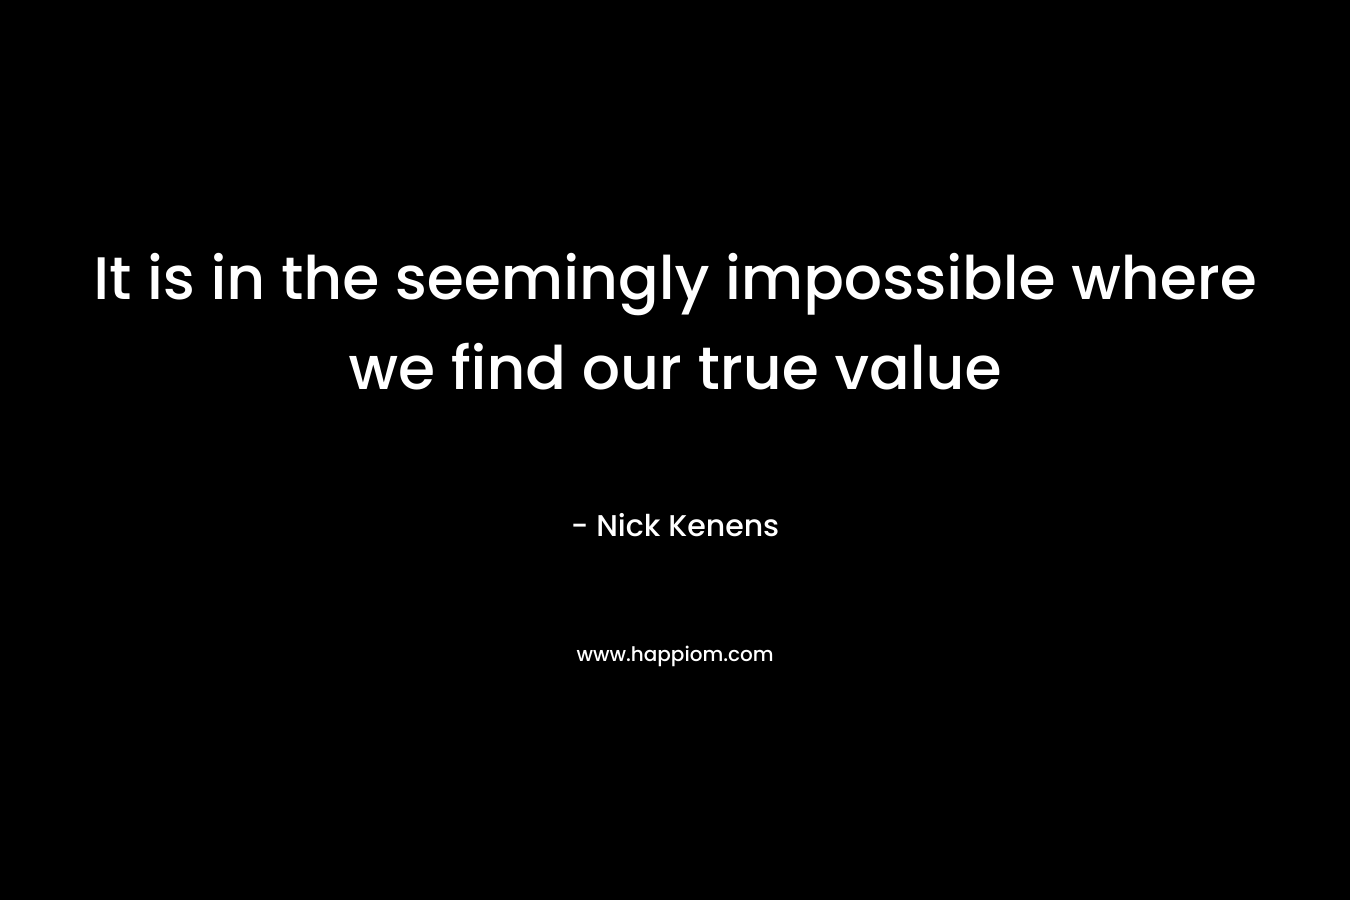 It is in the seemingly impossible where we find our true value